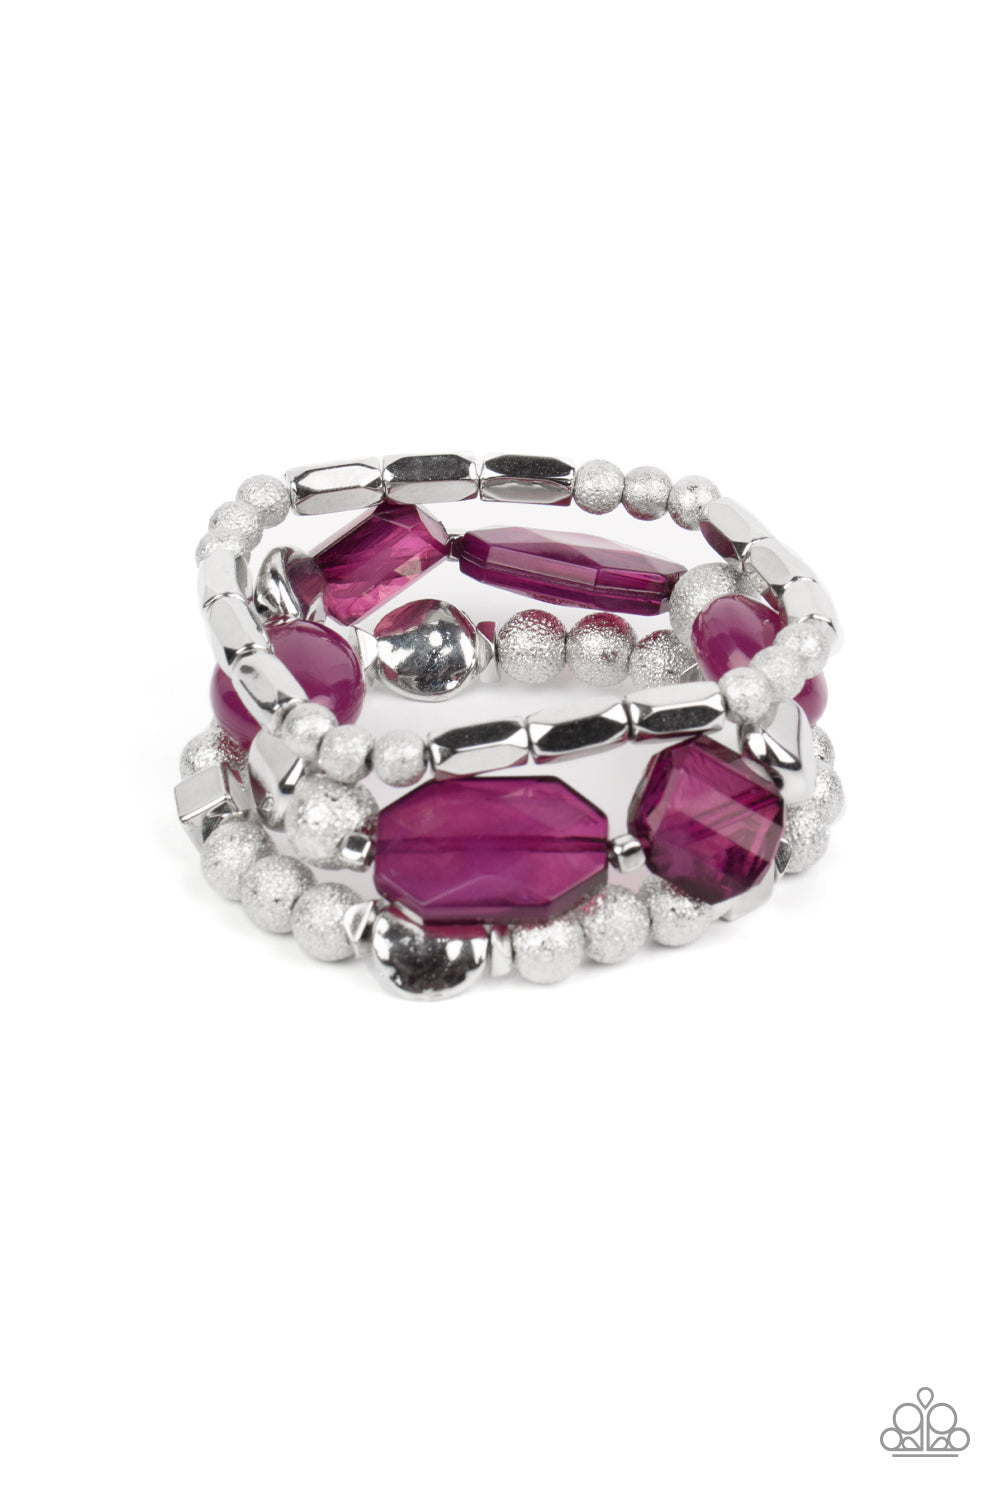 Marina Magic - Plum Purple - Silver Affordable Stretchy Bracelet - Paparazzi Accessories - Infused with vivacious pops of plum crystal-like and glassy accents, a mismatched assortment of hammered, cube, and faceted silver beads are threaded along stretchy bands around the wrist, creating shimmery layers. 